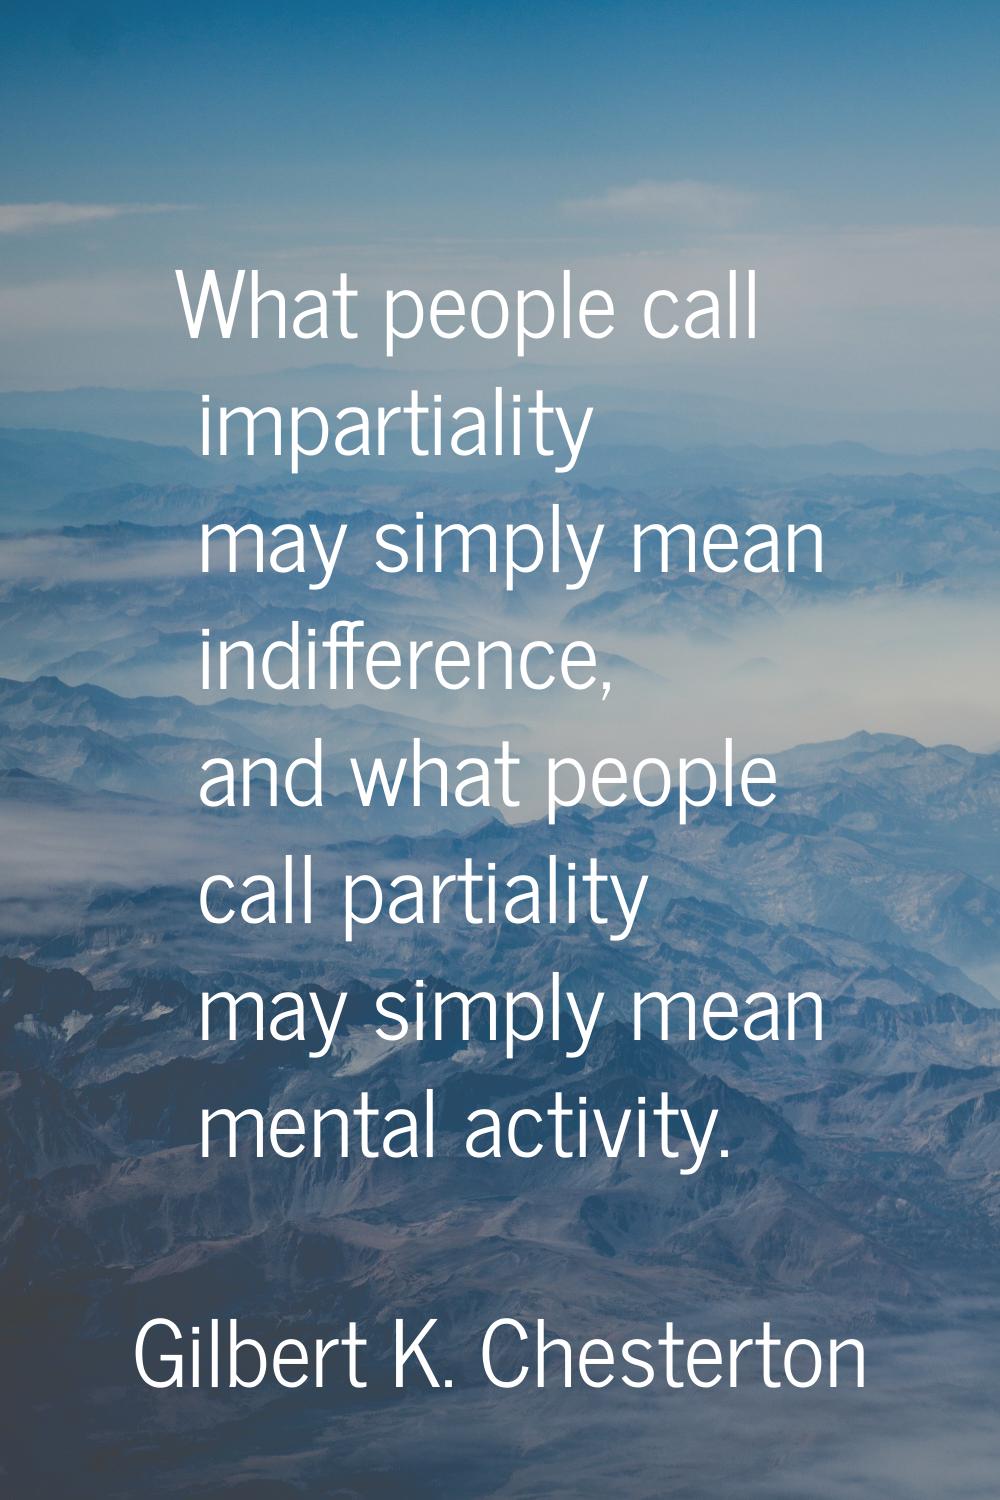 What people call impartiality may simply mean indifference, and what people call partiality may sim